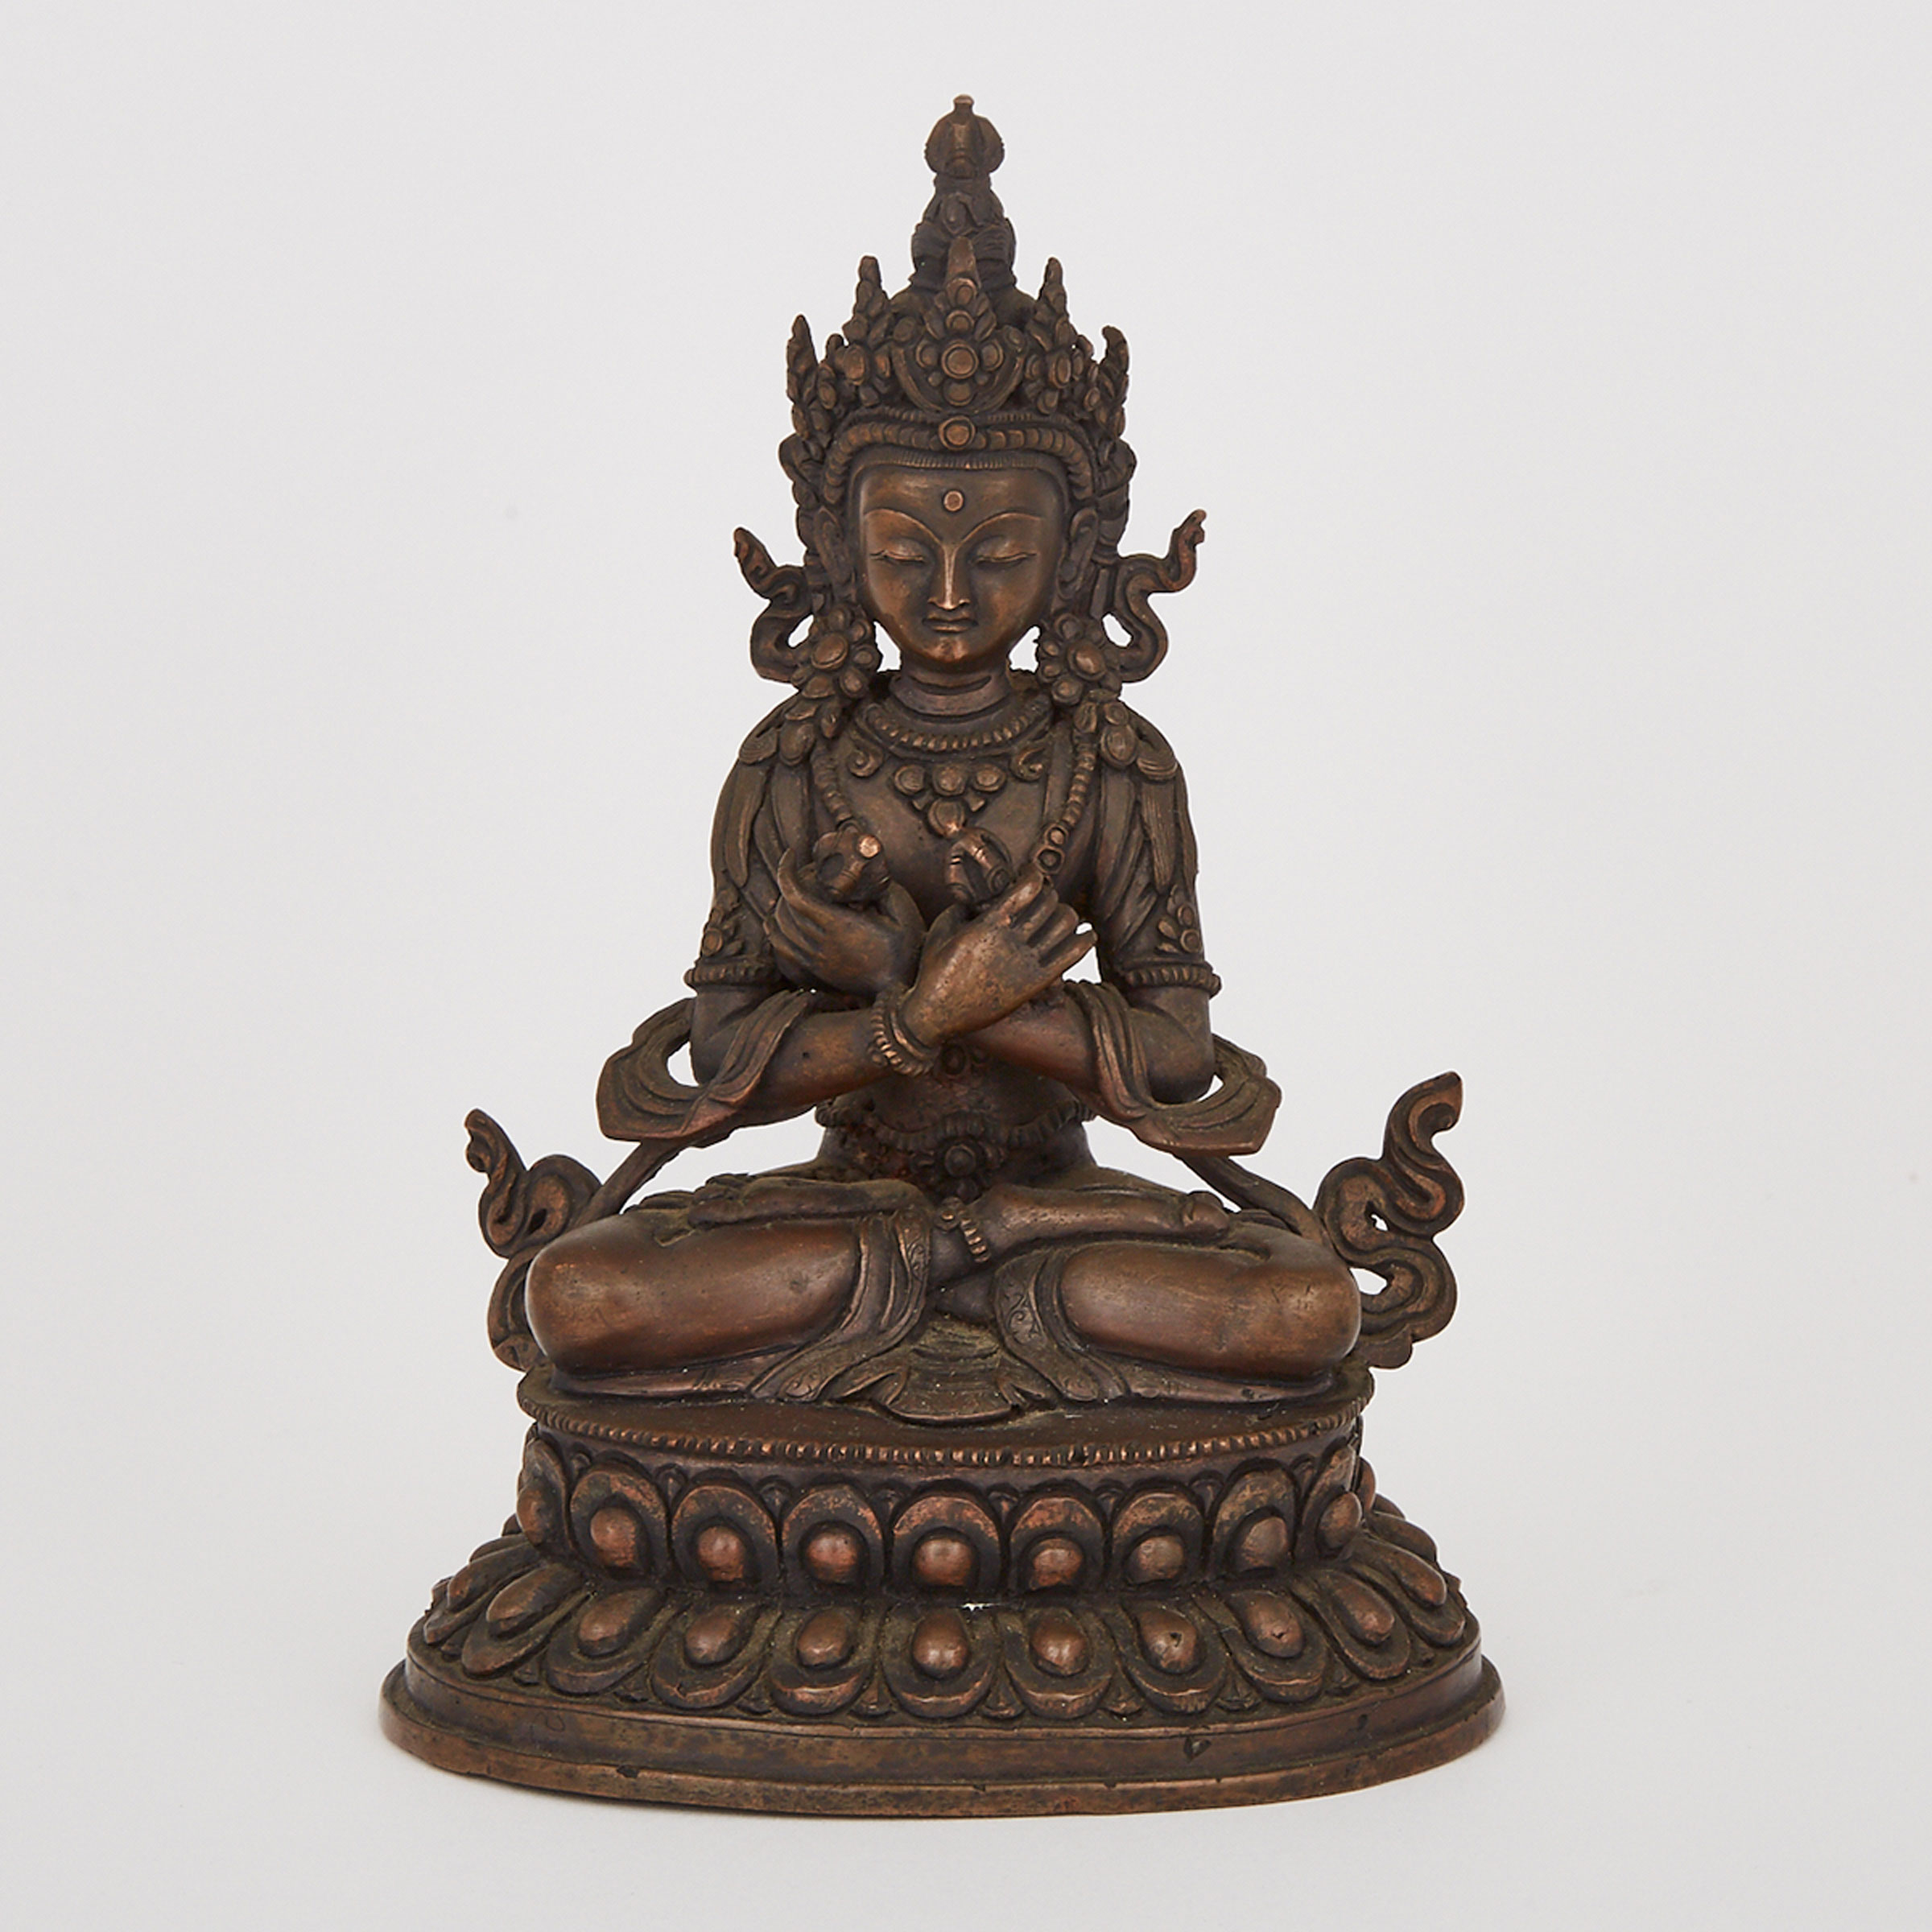 A Bronze Seated Buddha, Tibet, 19th Century or Earlier